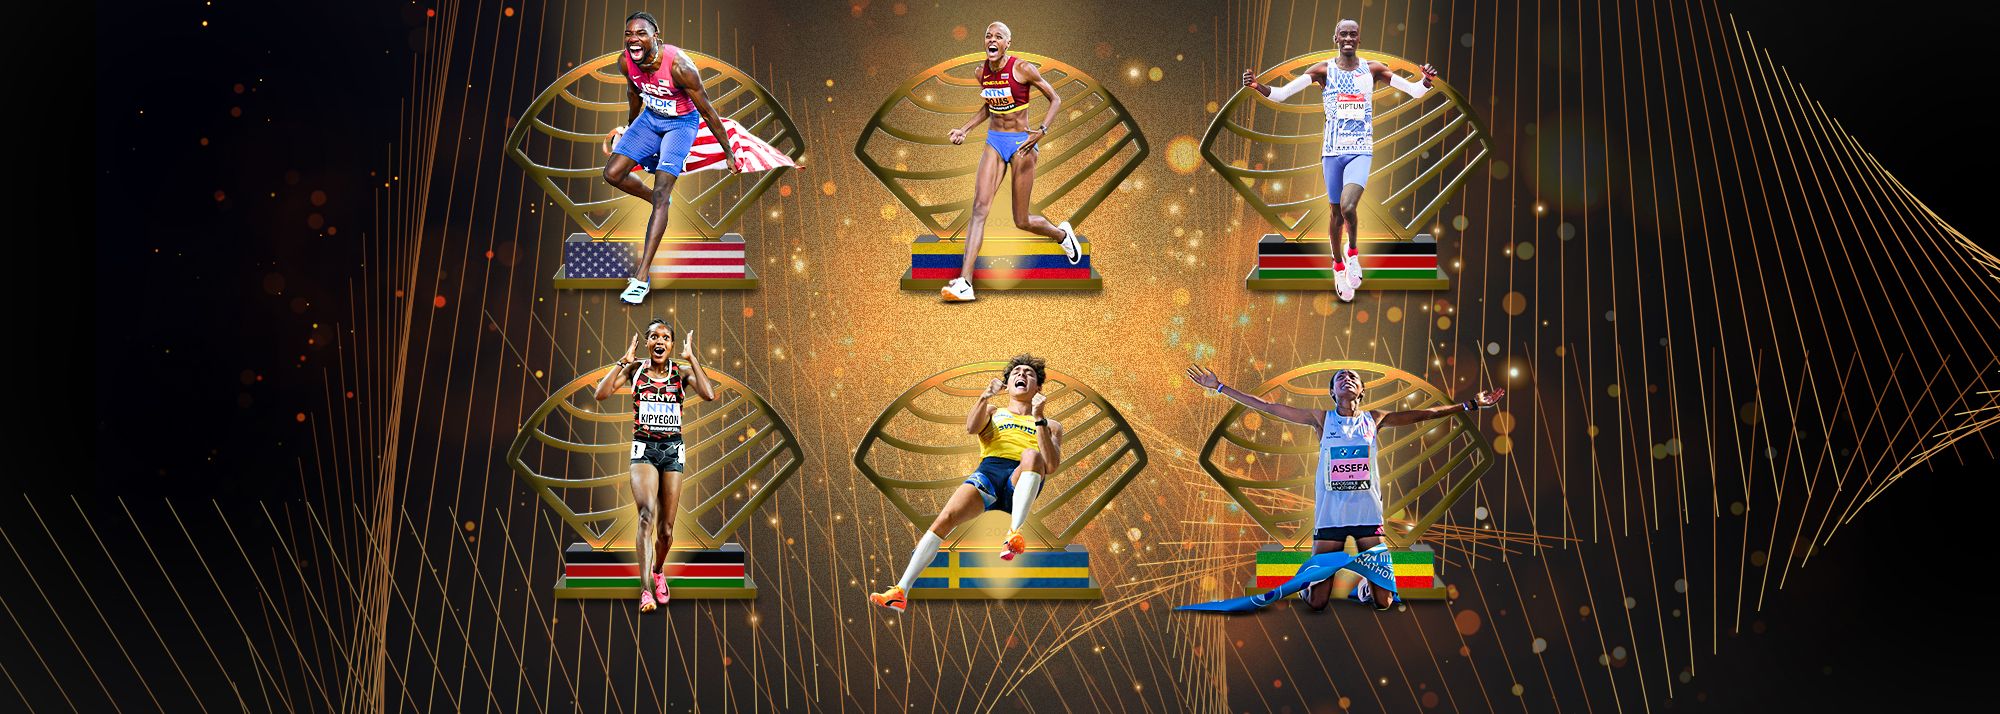 Tigist Assefa, Mondo Duplantis, Kelvin Kiptum, Faith Kipyegon, Noah Lyles and Yulimar Rojas have been announced as World Athletes of the Year for 2023